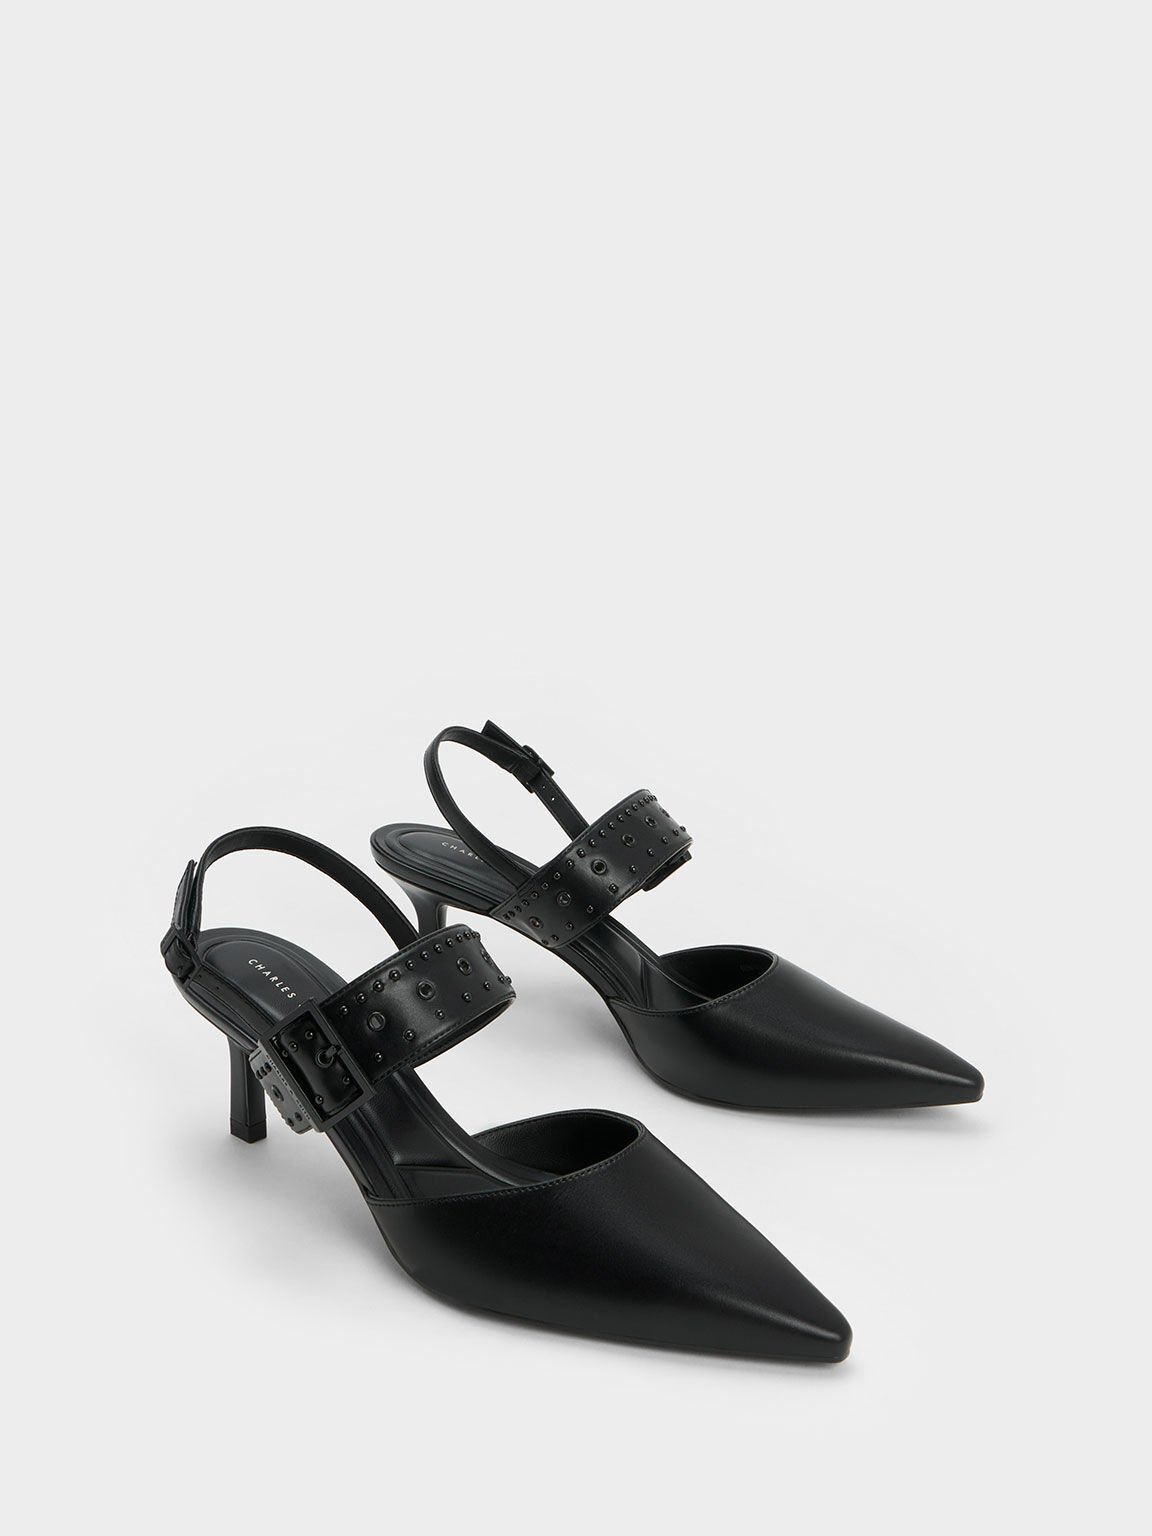 Women's Pumps | Shop Exclusive Styles | CHARLES & KEITH UK